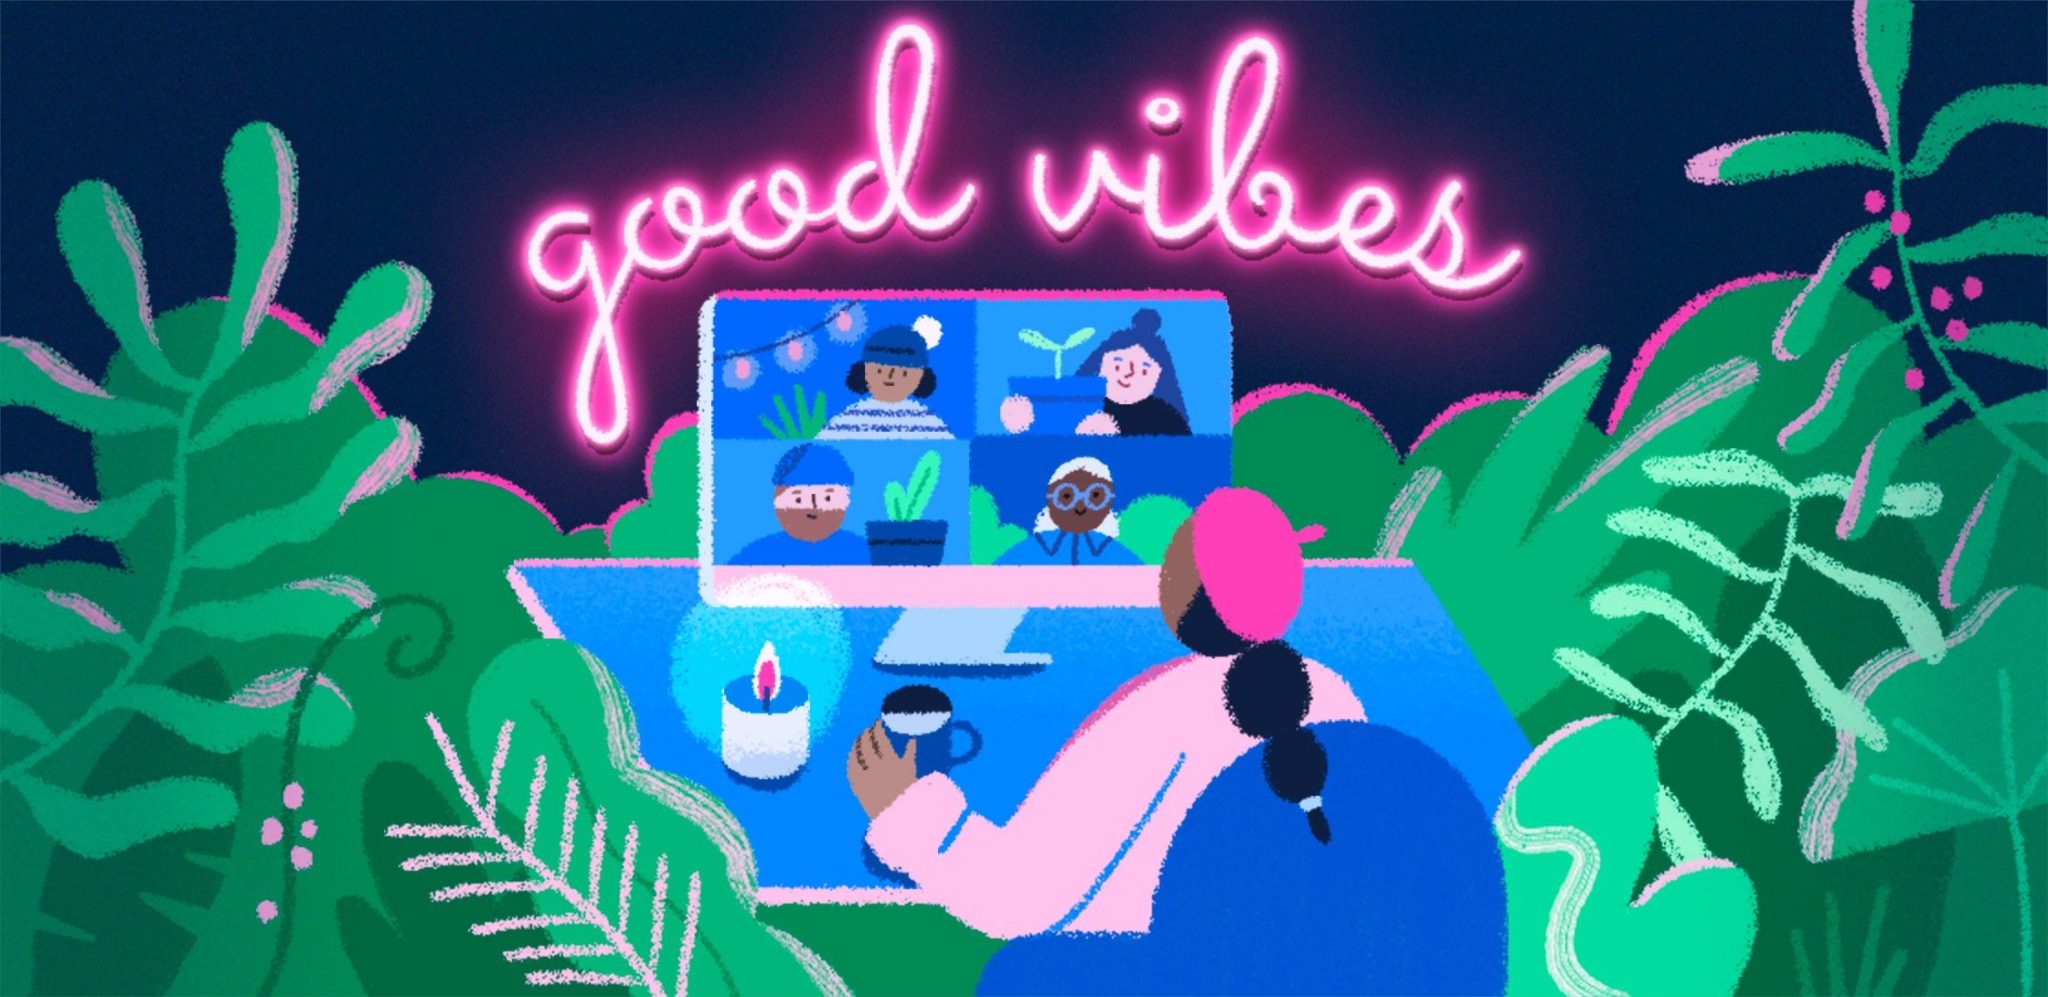 Why our team has a Chief Vibes Officer – and yours should too